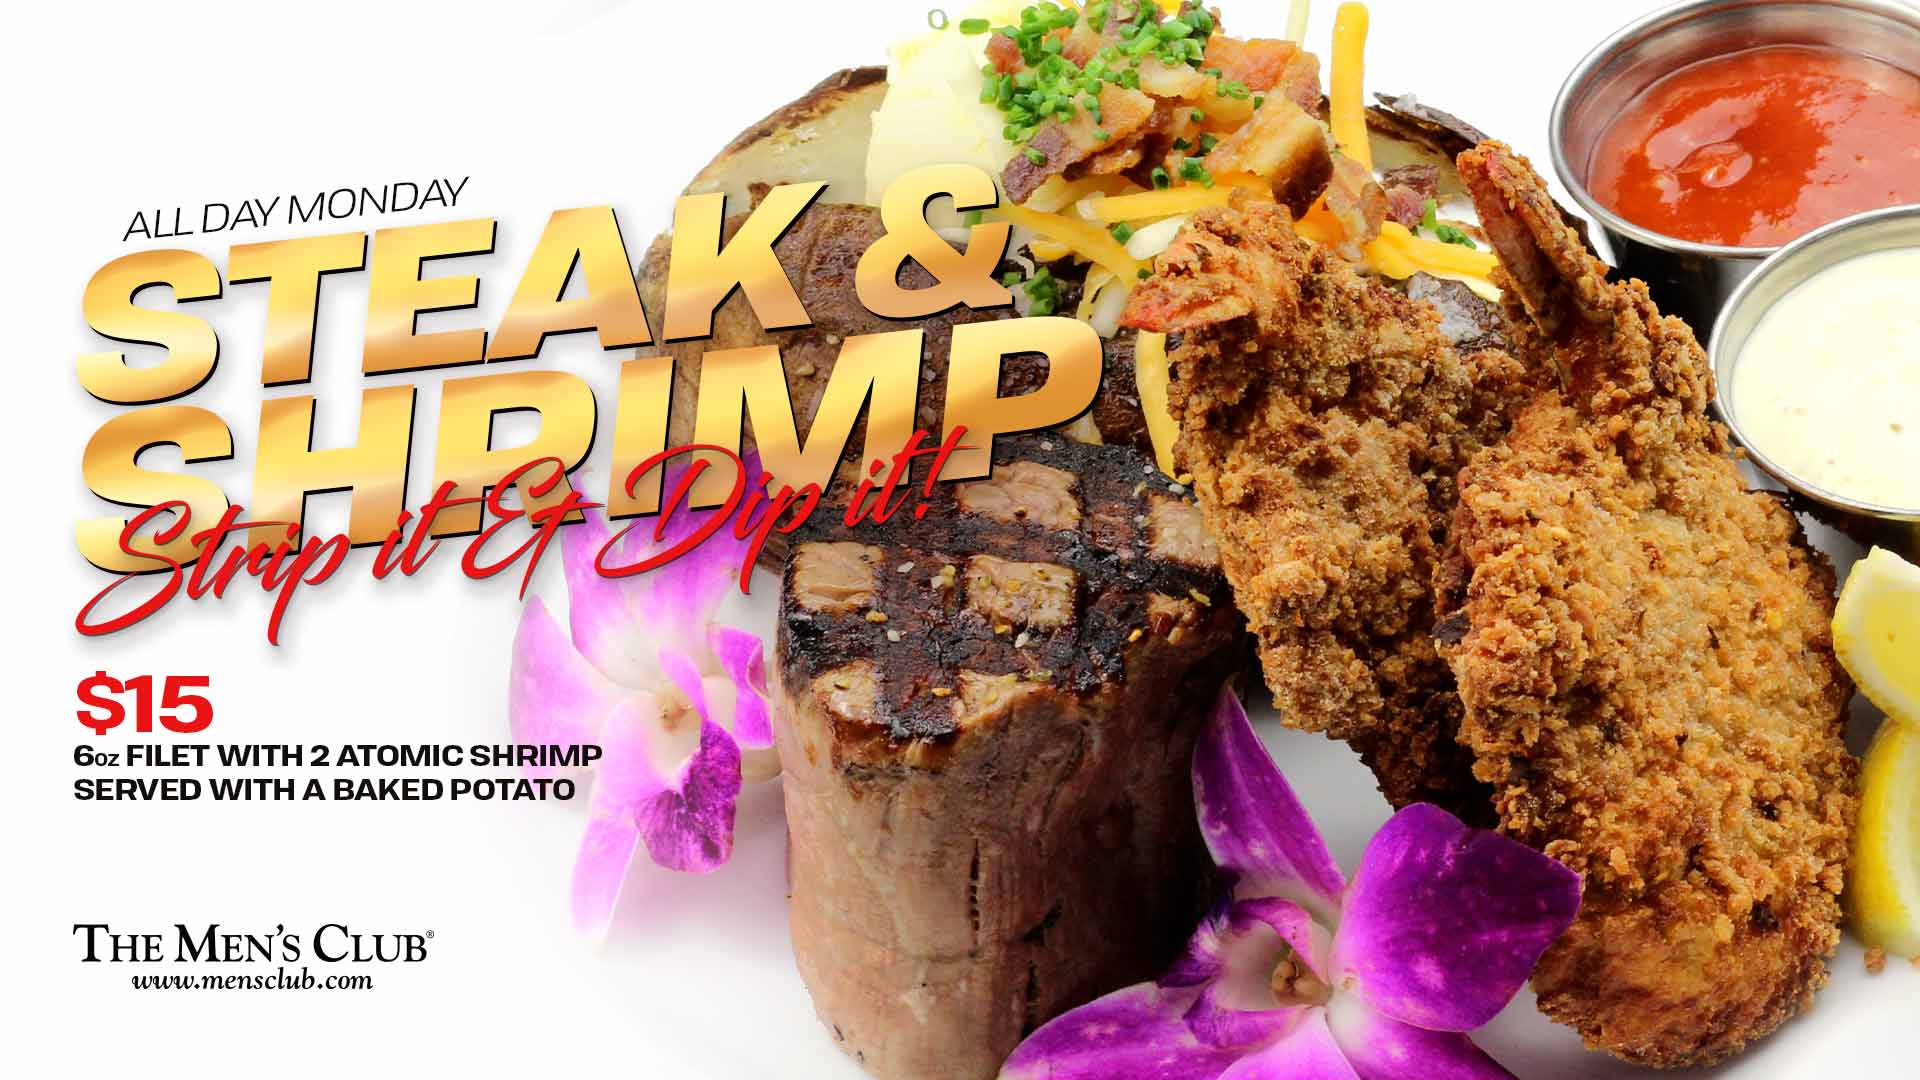 image of steak and shrimp special every monday at The Men's Club